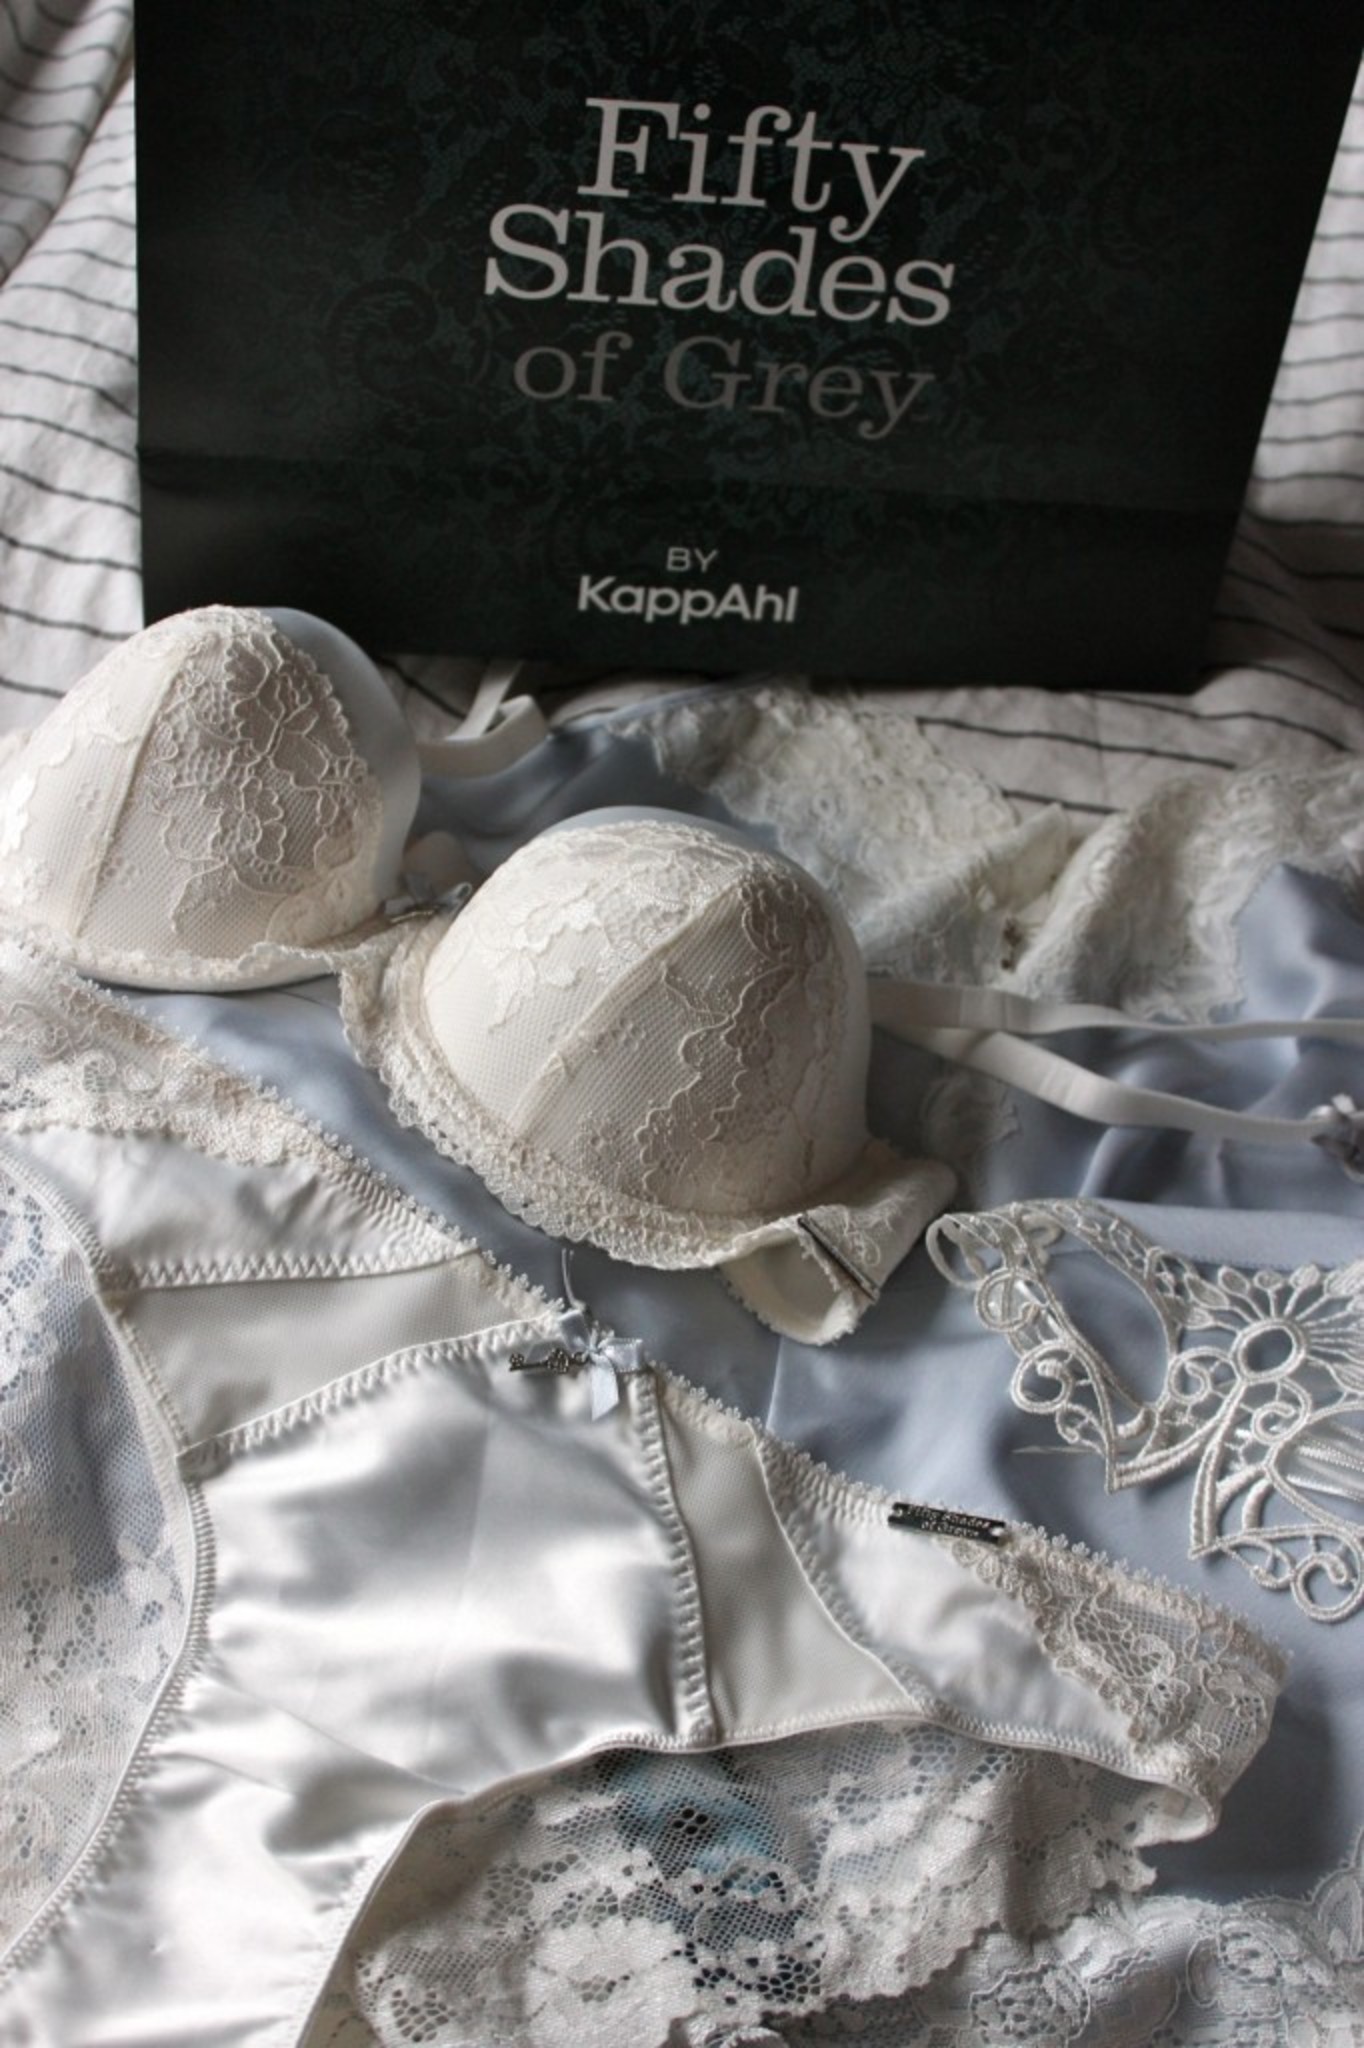 Fifty Shades of Grey Inspired Lingerie from KappAhl